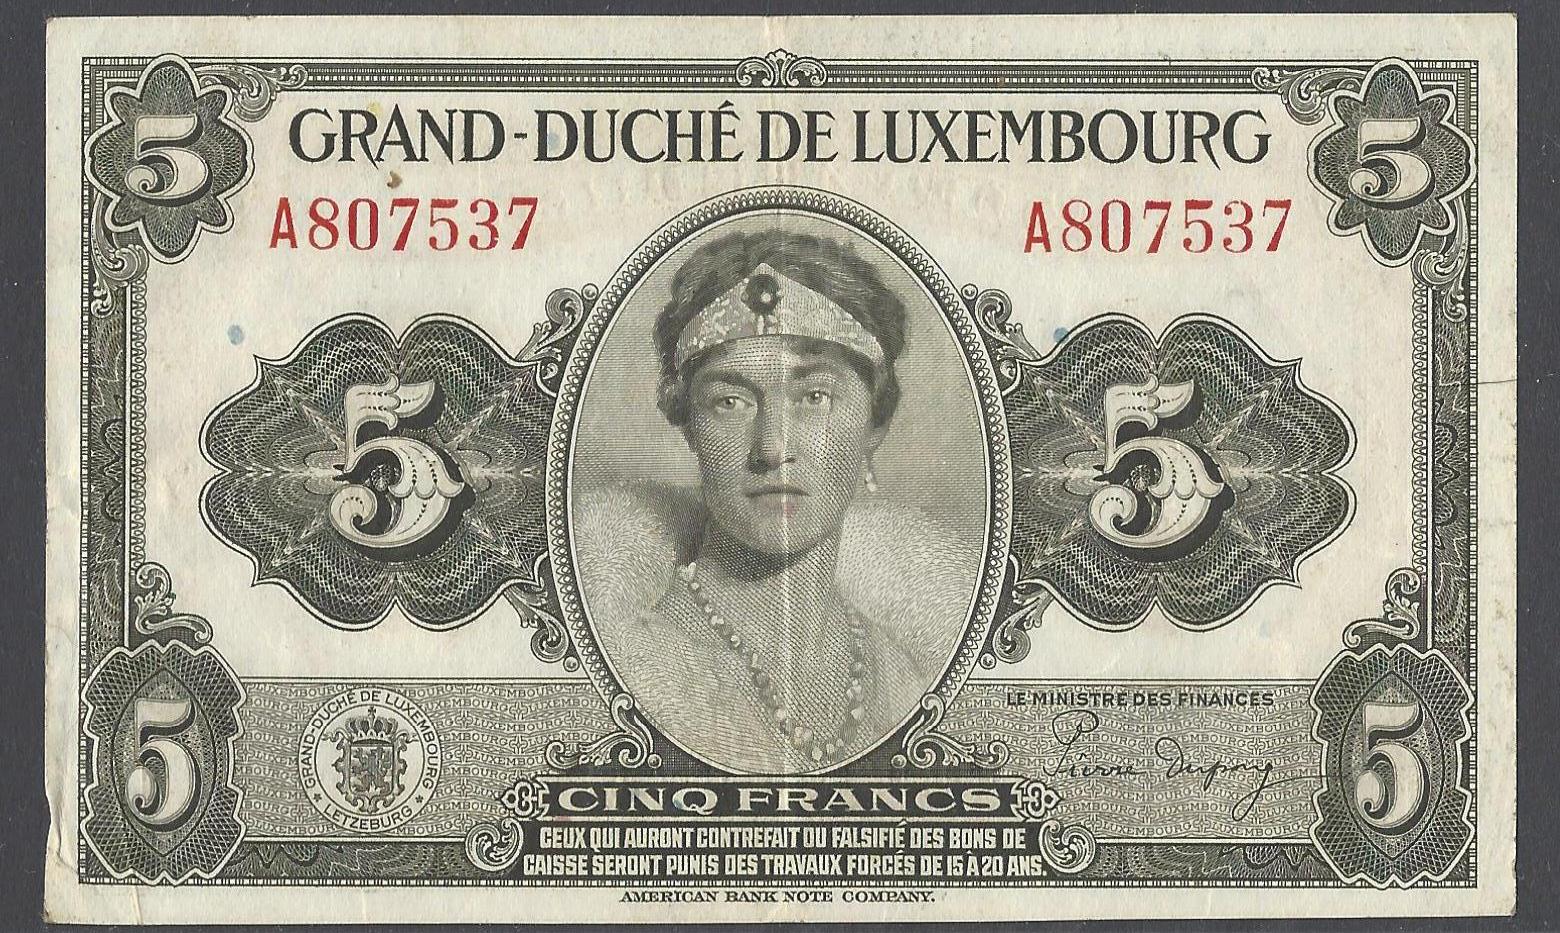 abnc_Luxembourg_5Francs_A807537_face.jpg